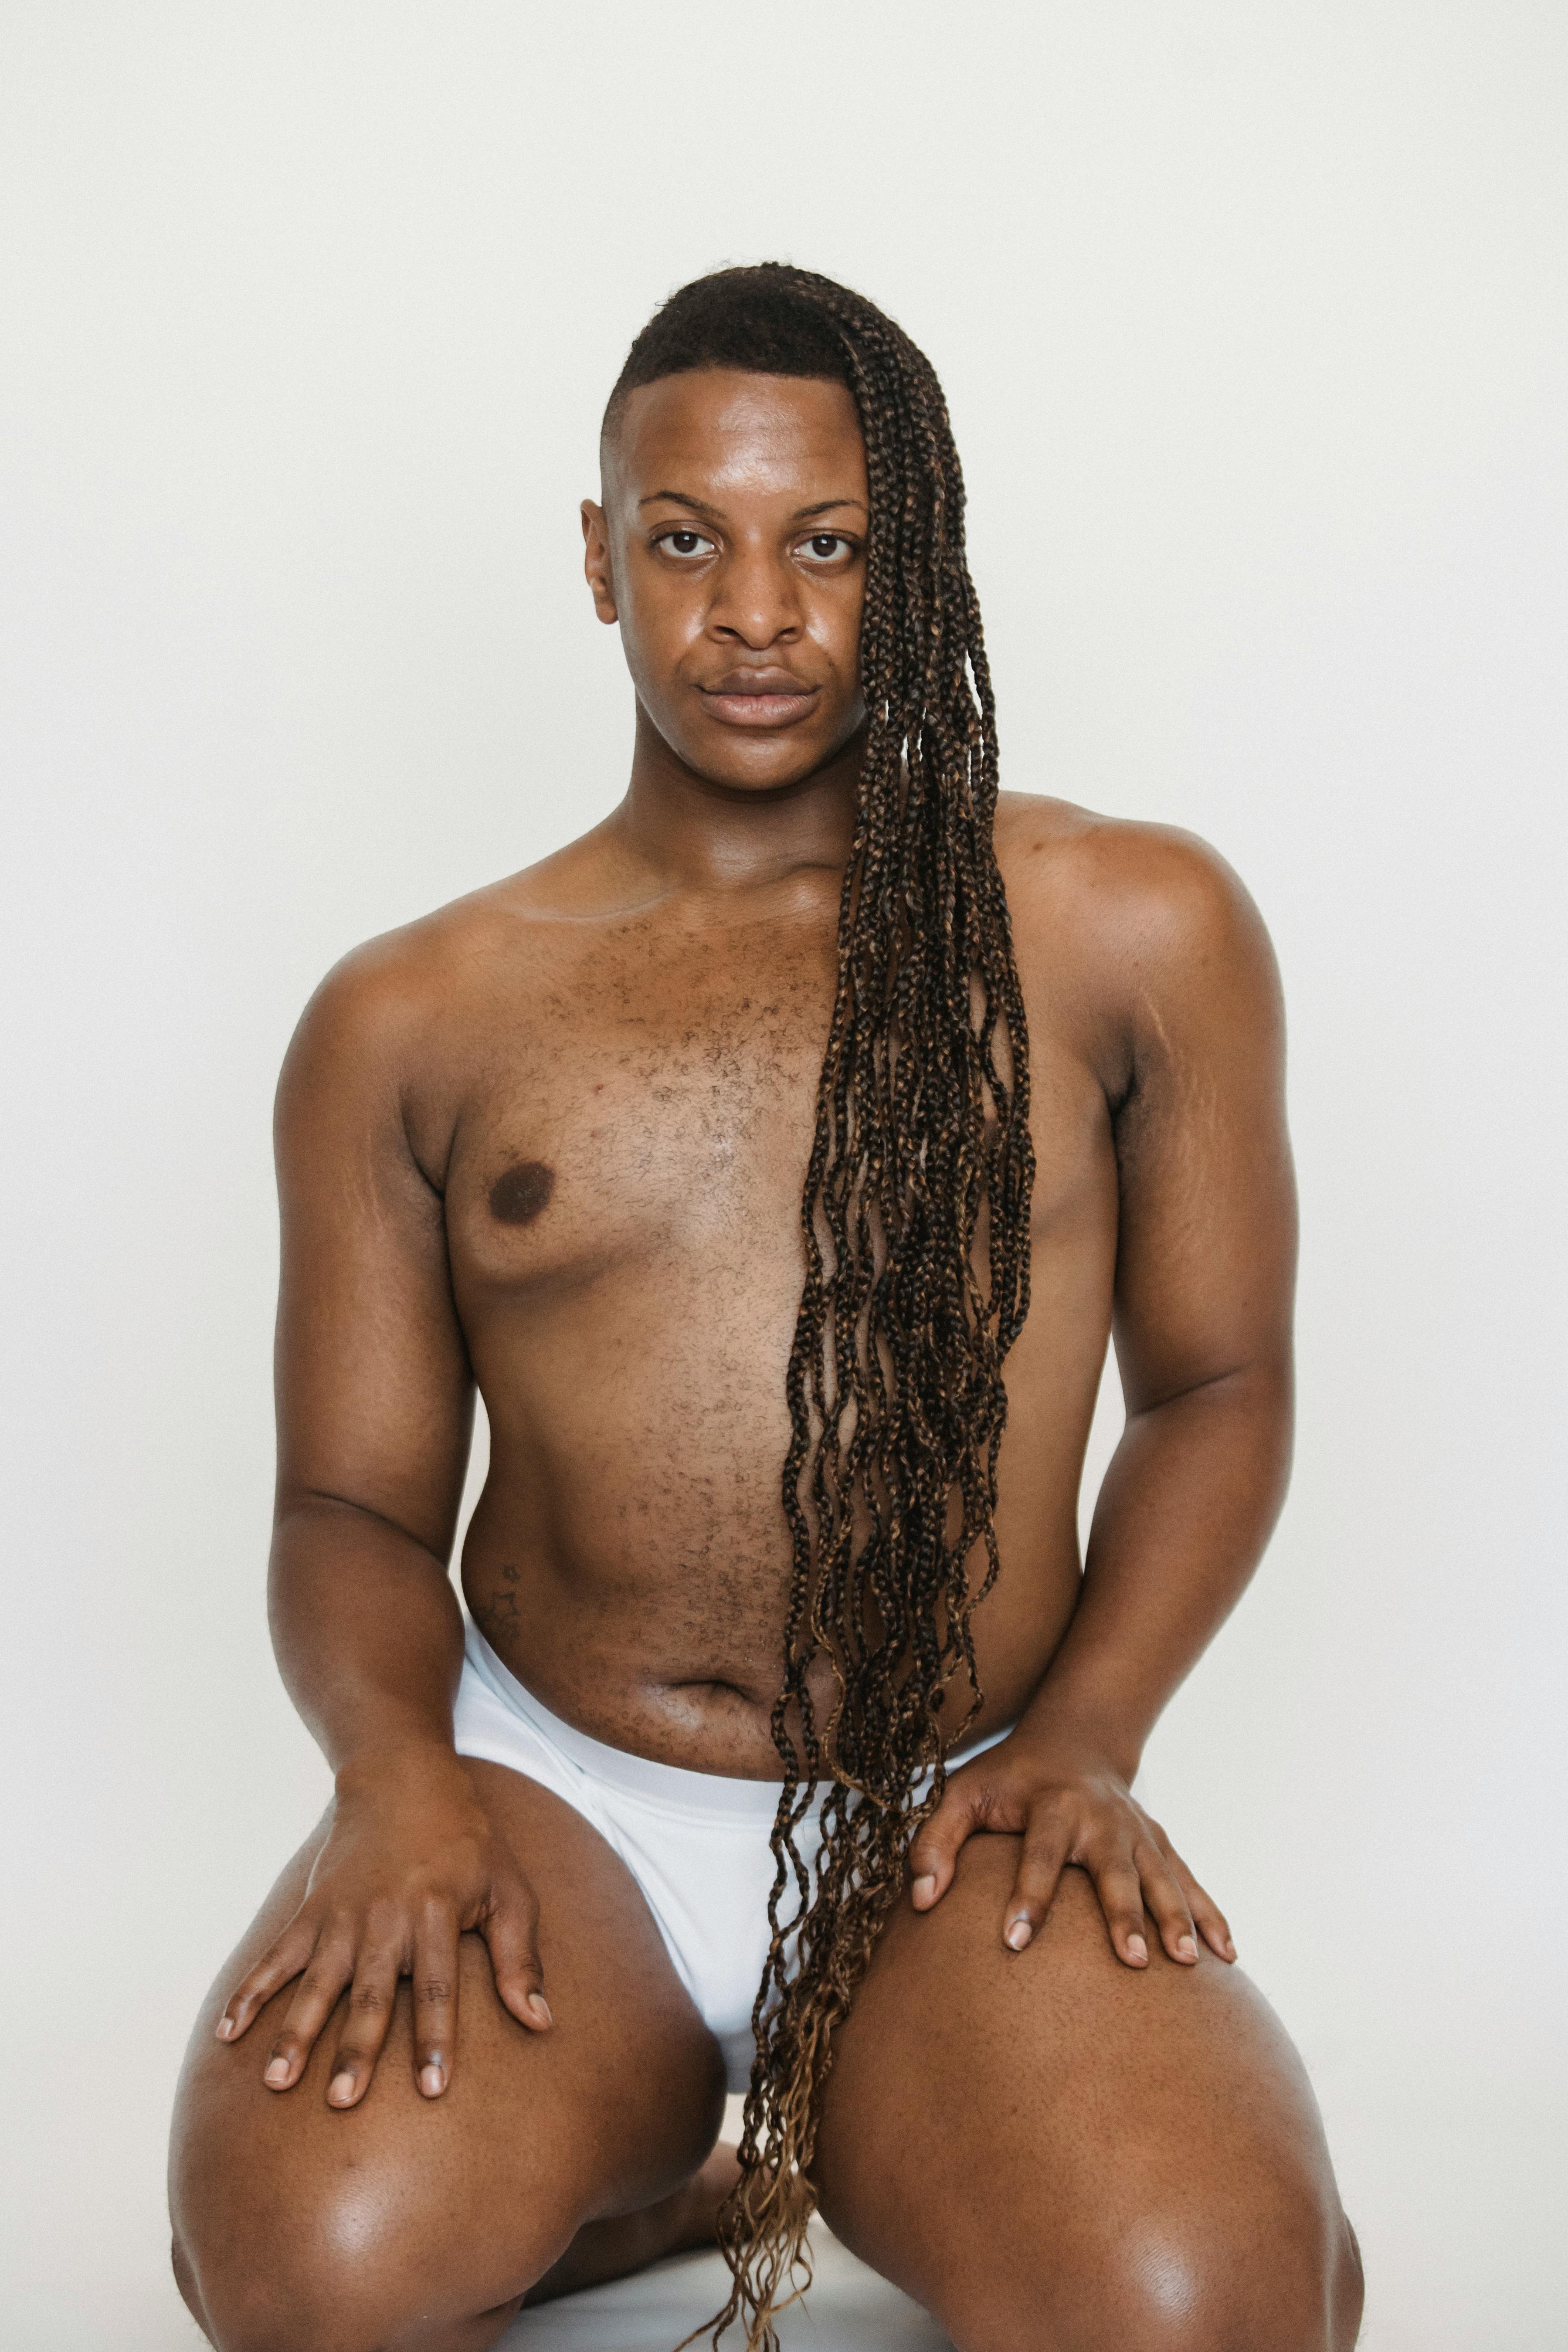 Transgender black man in underwear with Afro braids · Free Stock Photo picture image photo